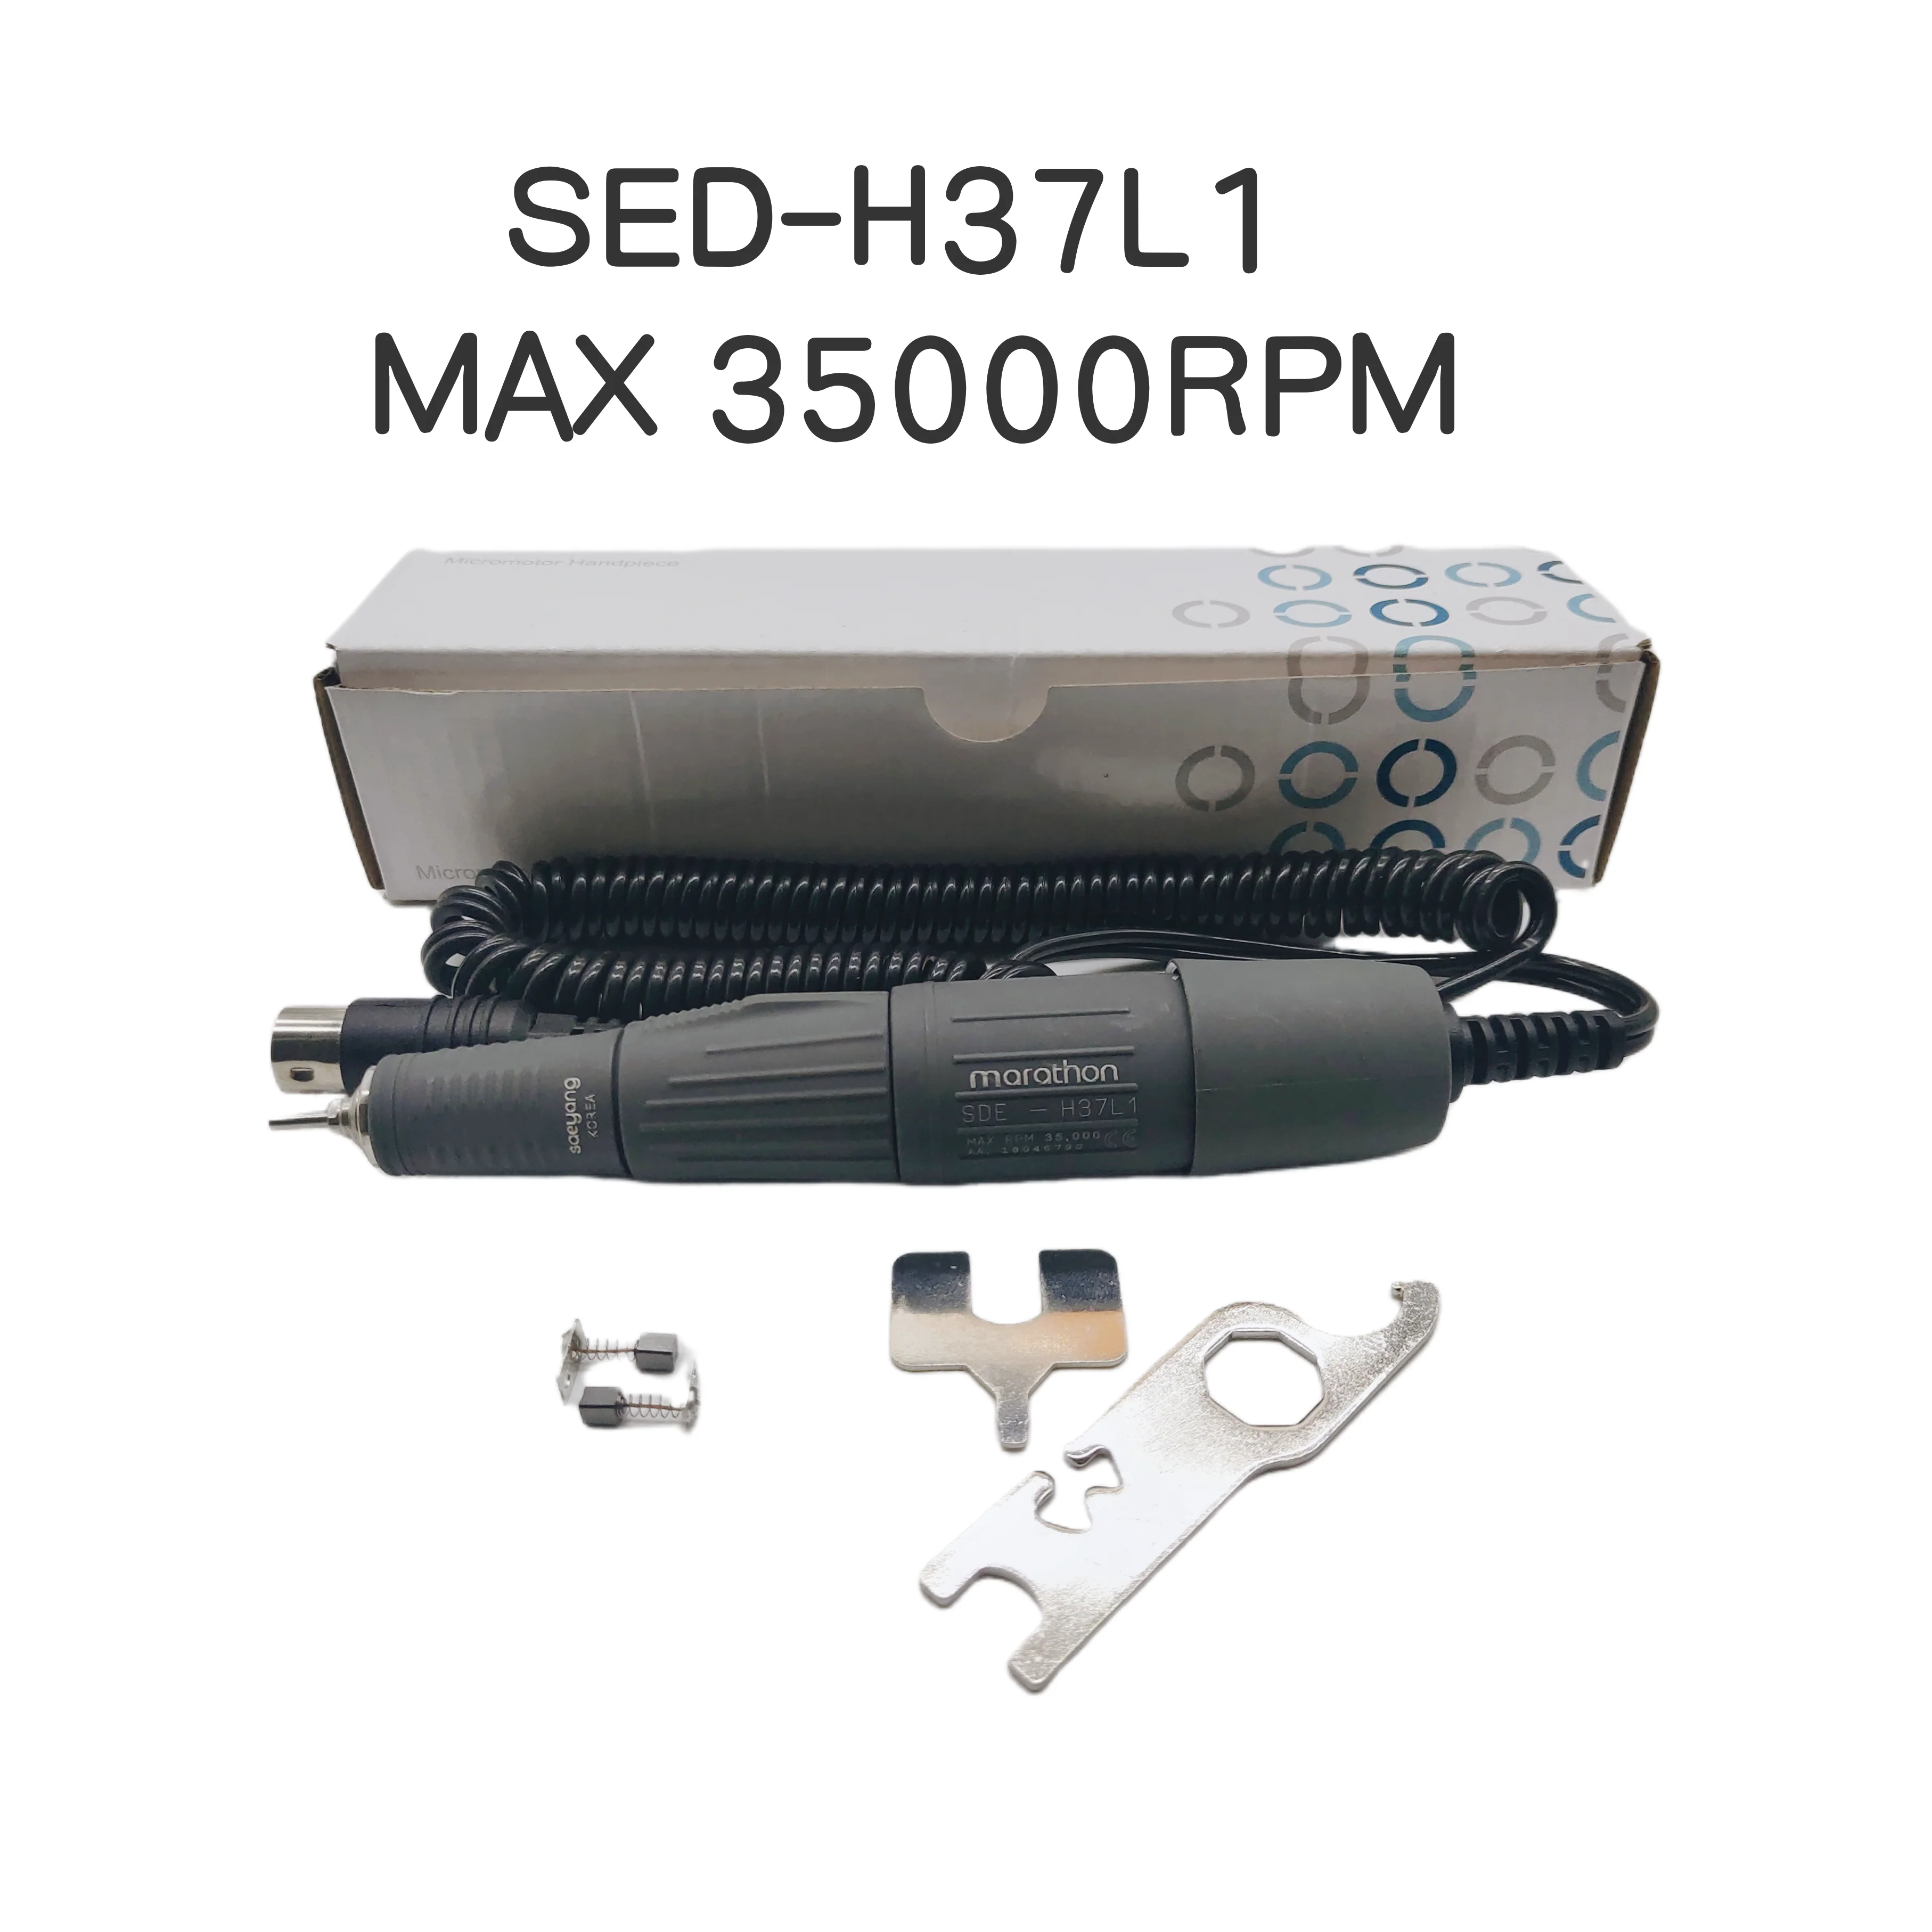 

35K SED-H37L1 Micromotor Handle Is Used For Strong 210 90 204 Marathon Control Box Electric Manicure Drill Nail File Polishing